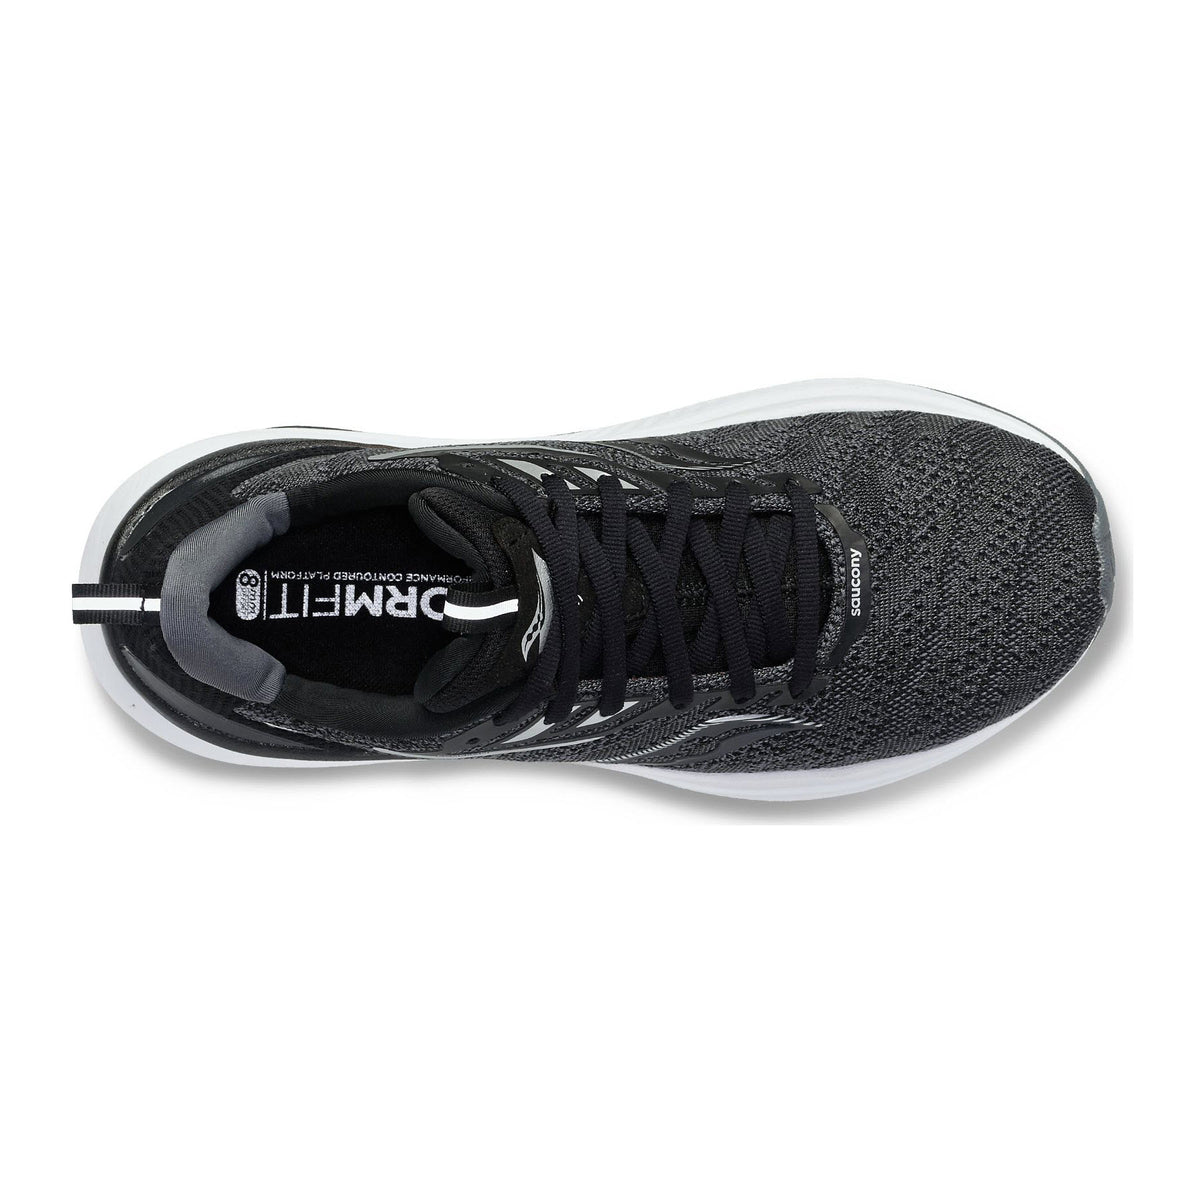 Top view of a single gray and black SAUCONY ECHELON 9 running shoe with laces, featuring a visible Saucony logo on the insole.